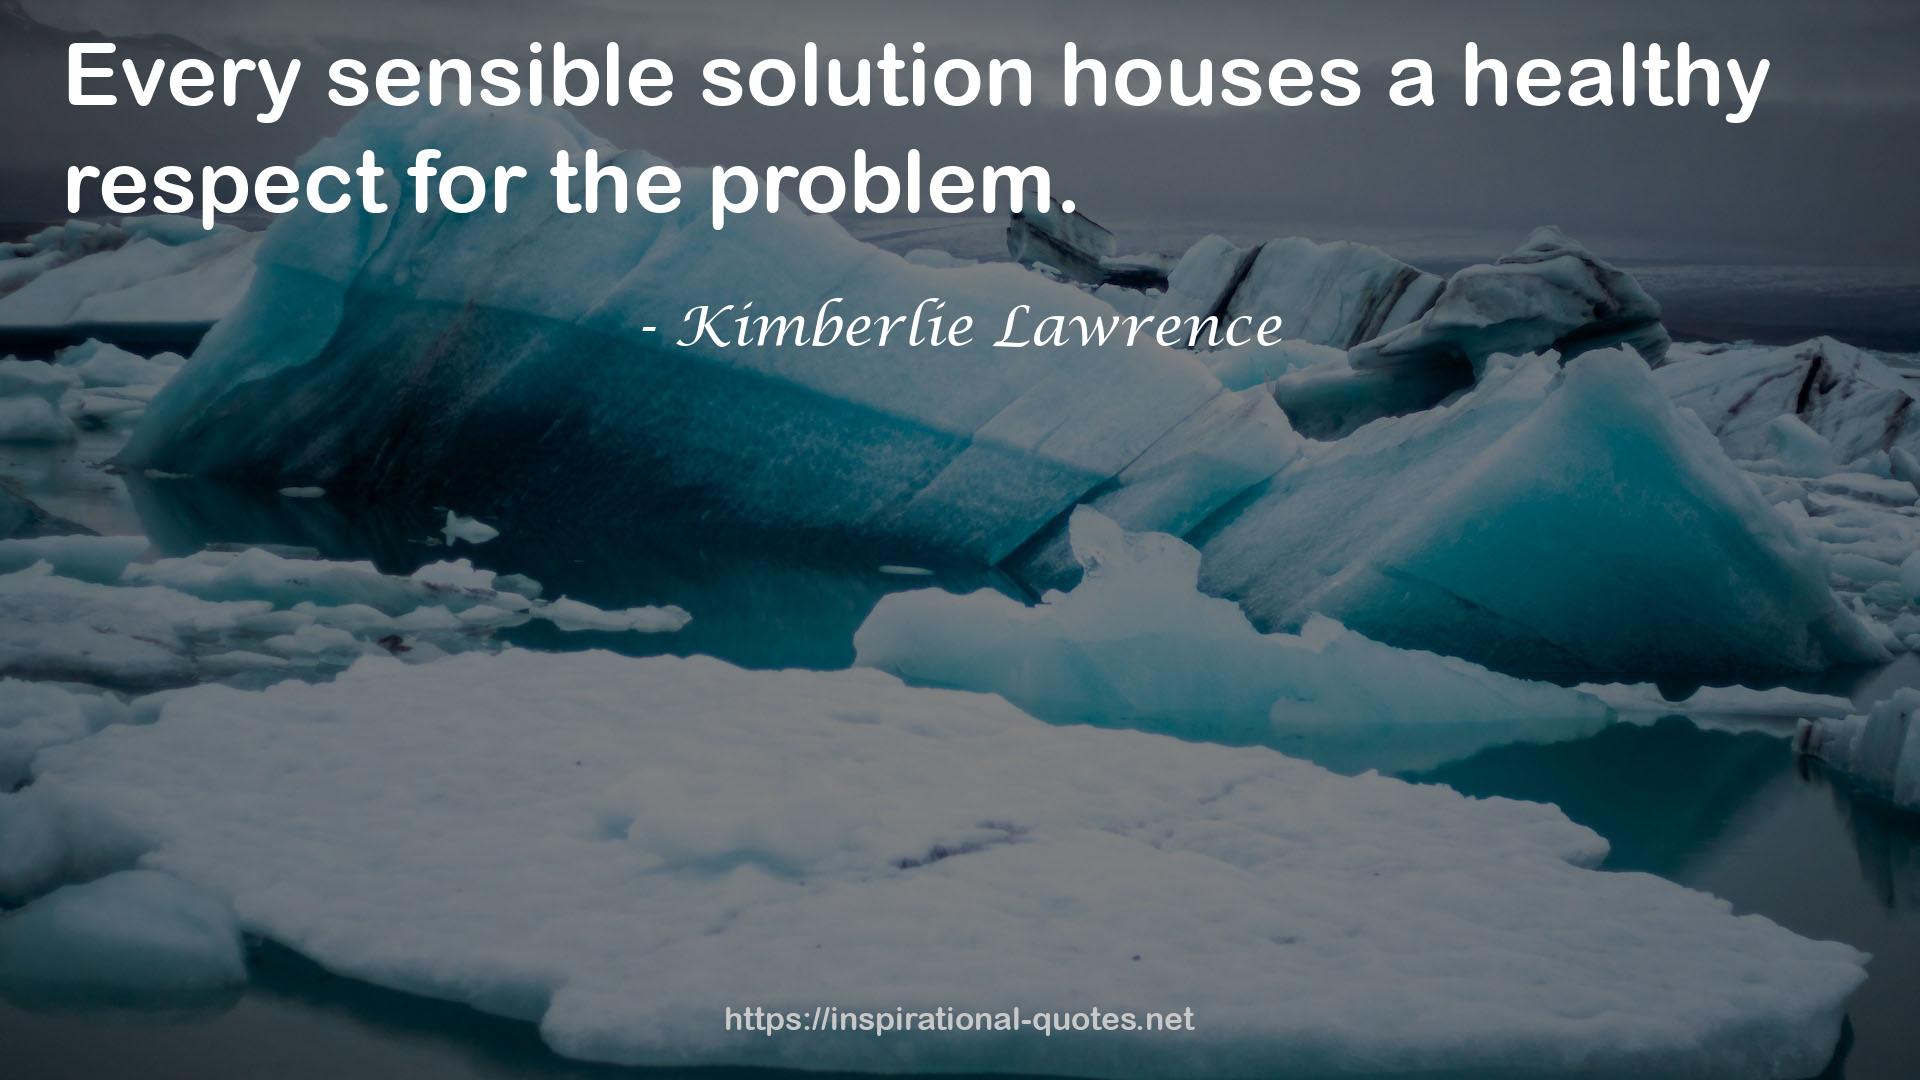 Kimberlie Lawrence QUOTES